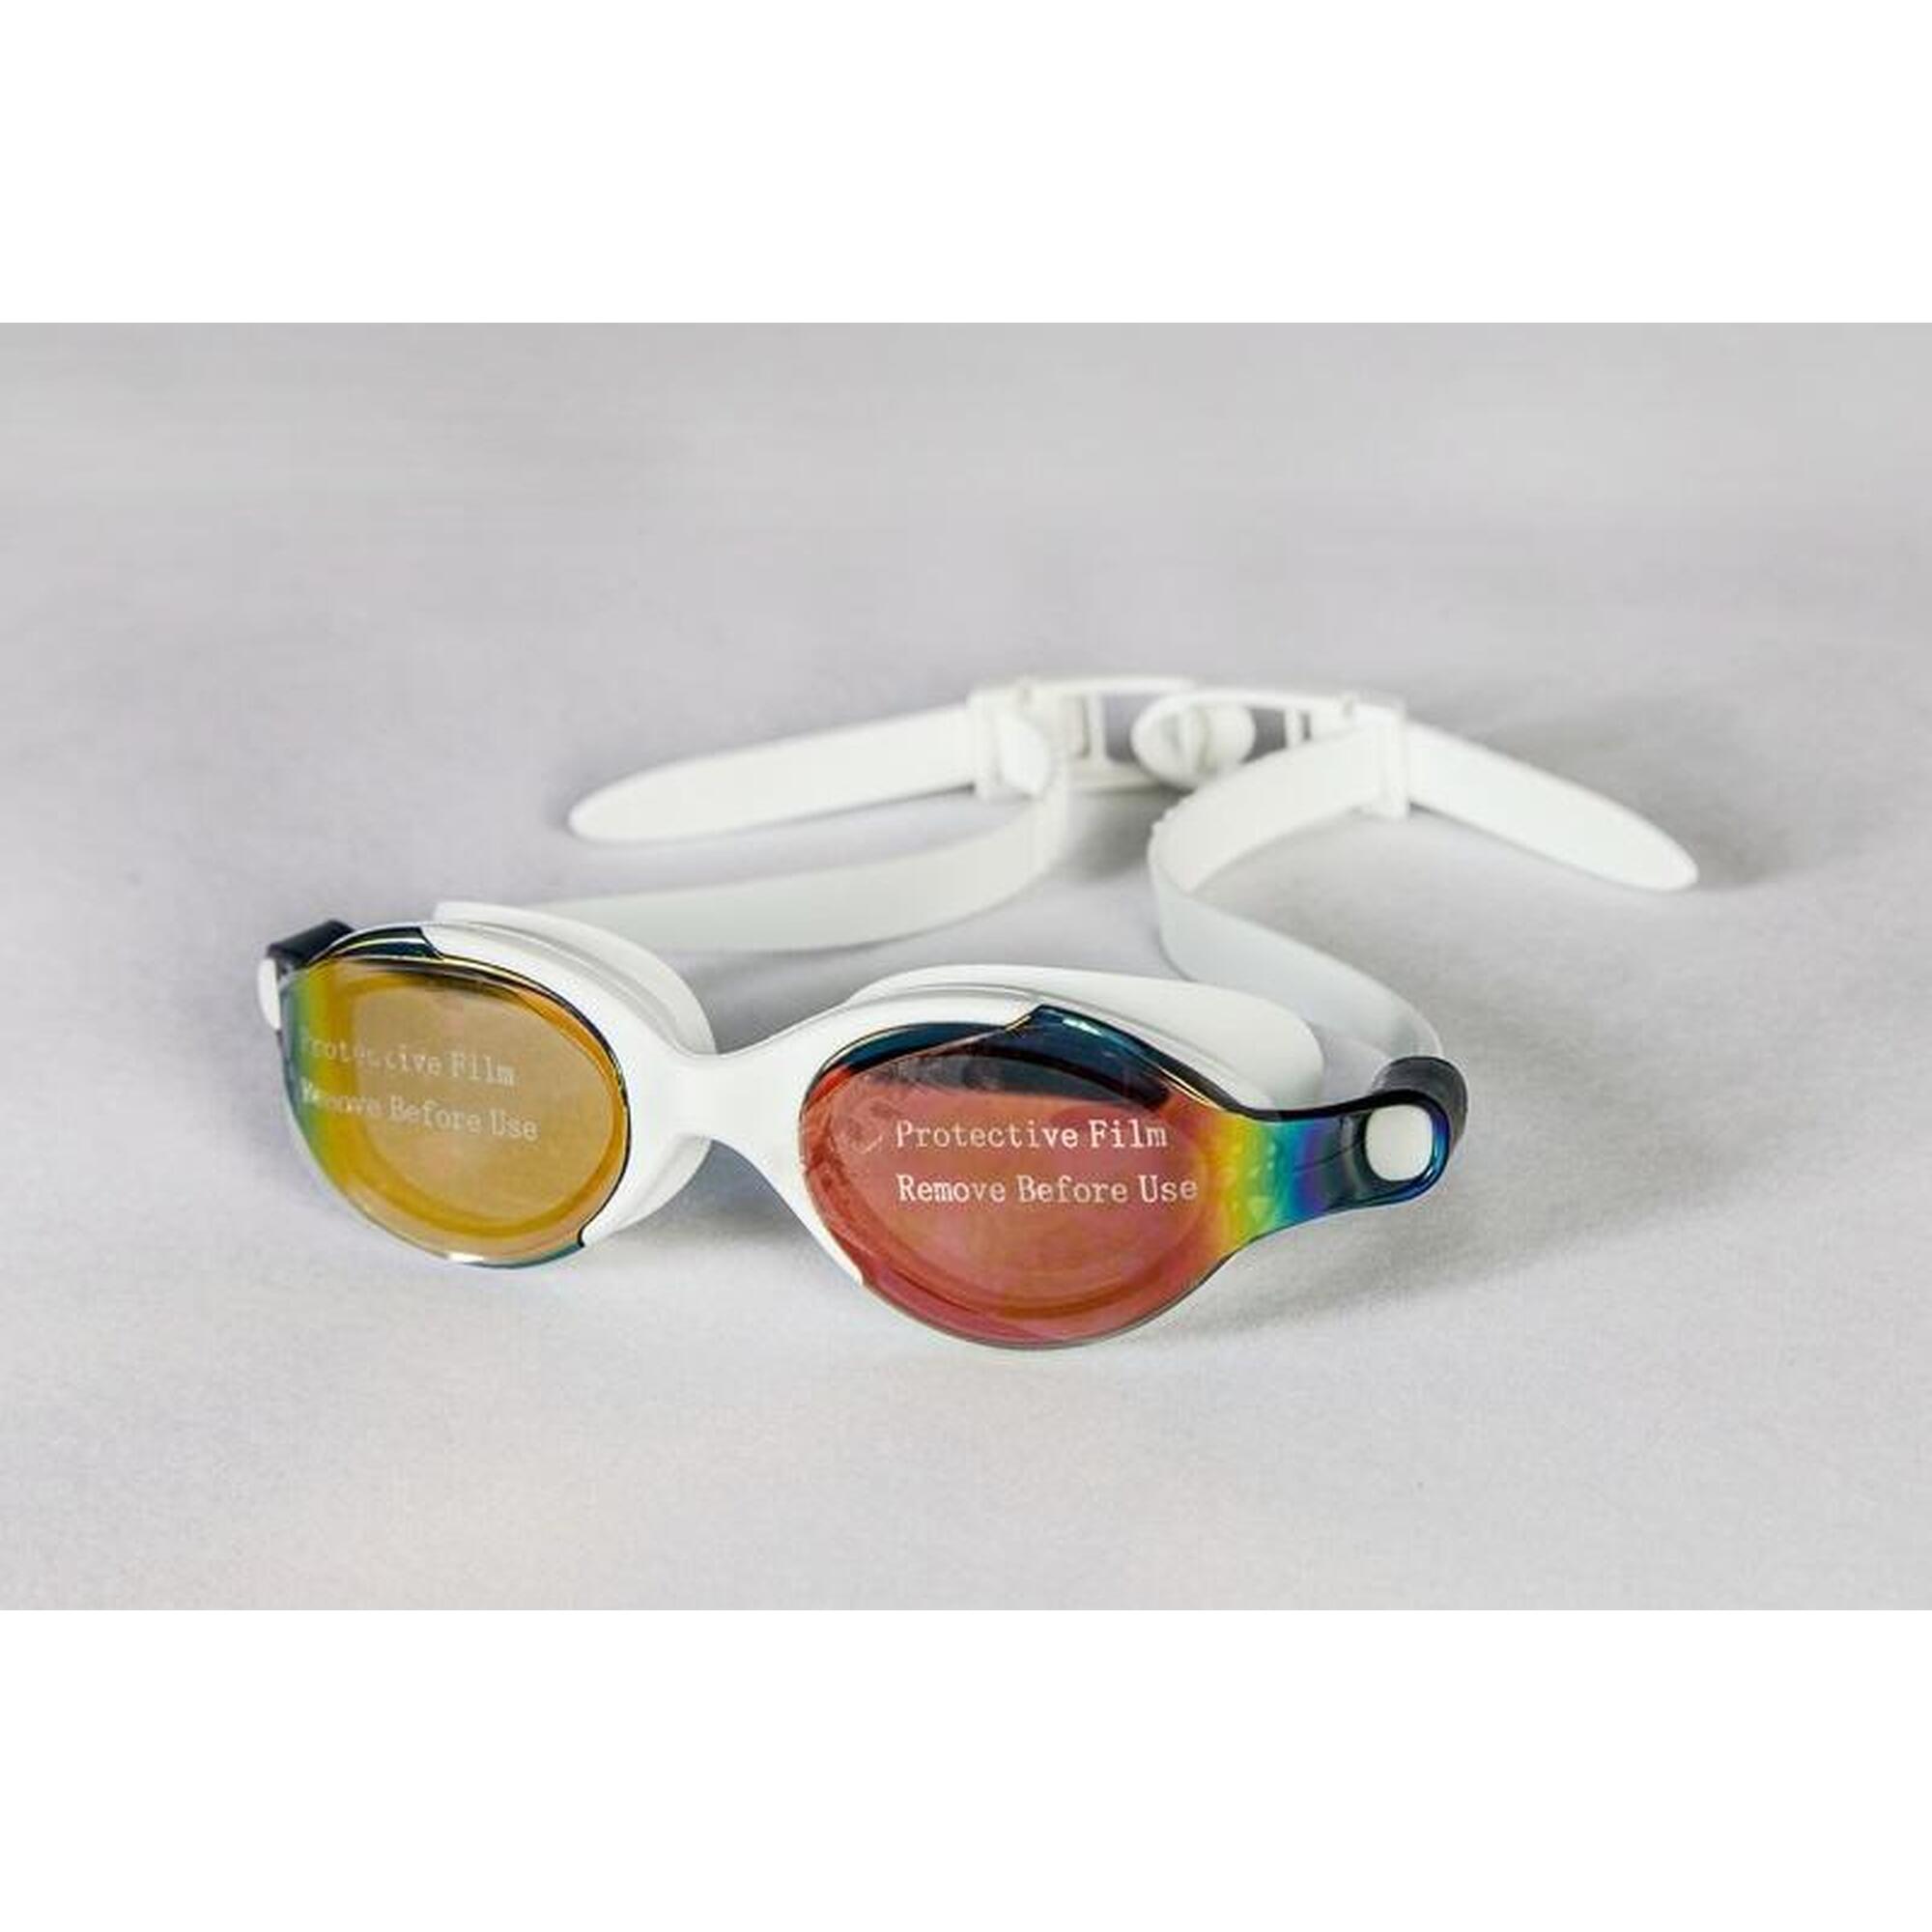 MS-9500 Silicone Anti-Fog UV Protection Optical Swimming Goggles - White/Red